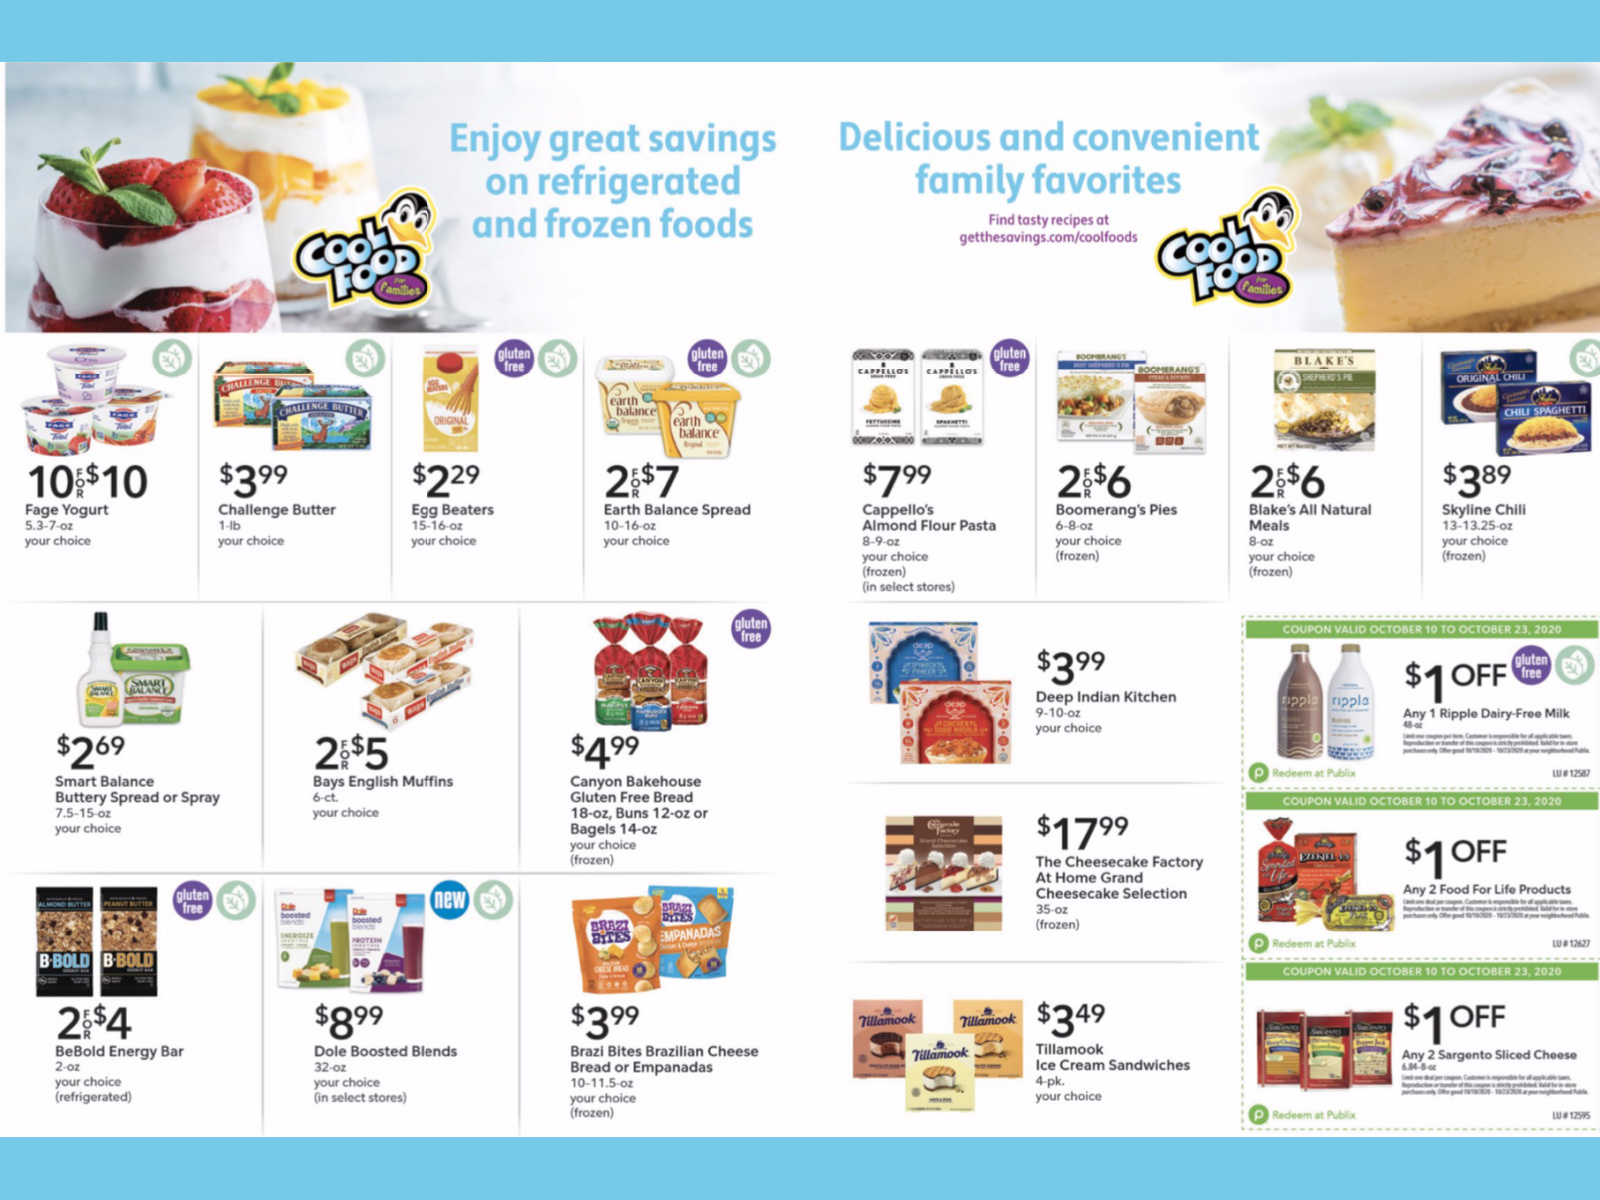 Don’t Miss Great Deals Throughout The Frozen & Dairy Aisles At Publix – Save During The Cool Foods For Families Promotion!